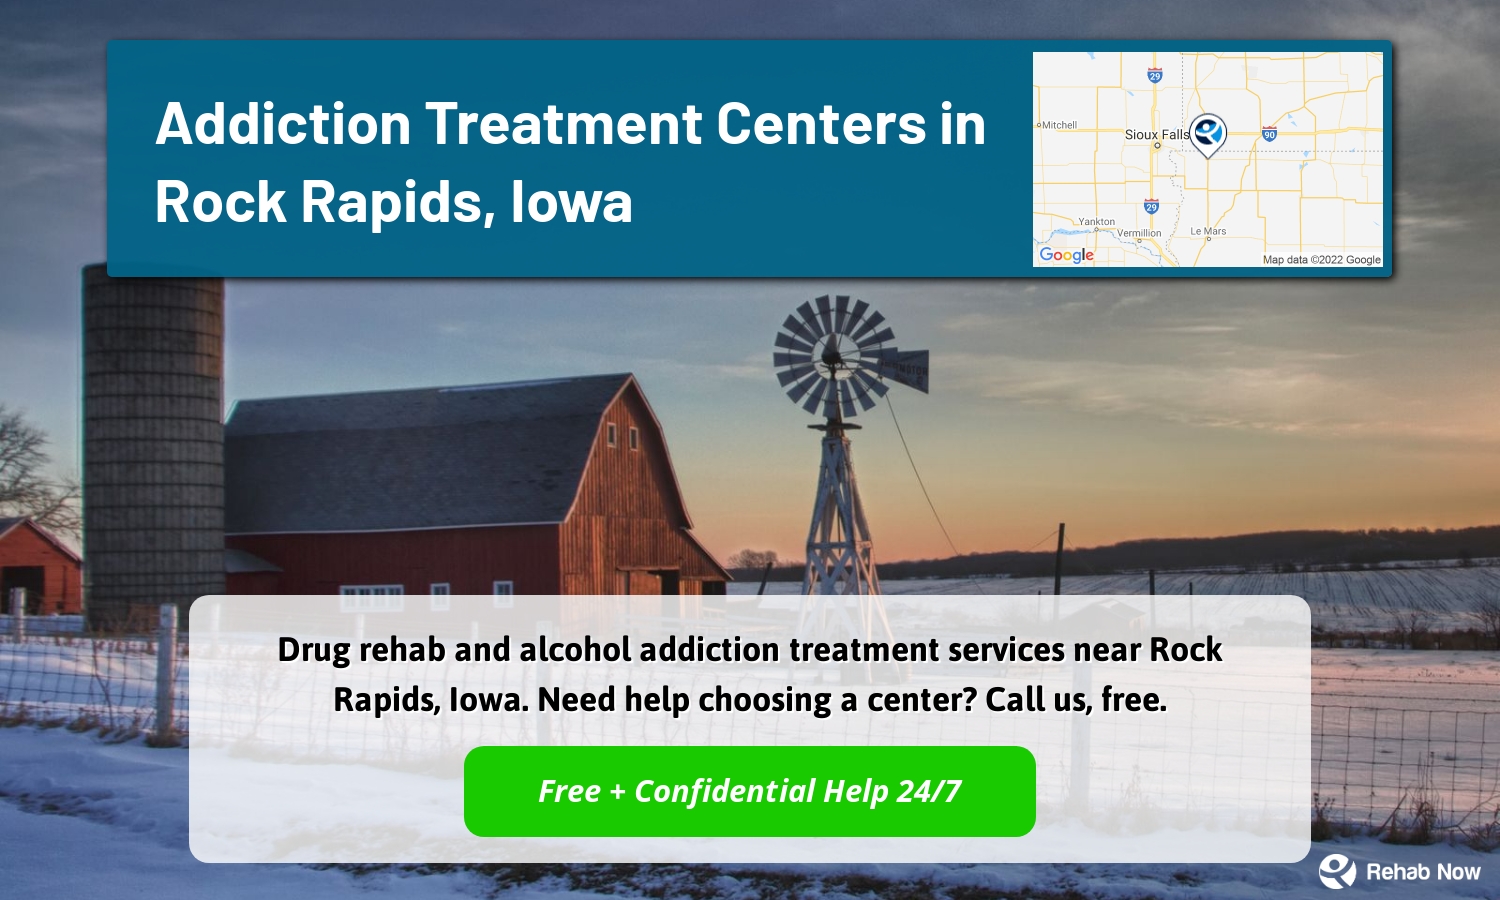 Drug rehab and alcohol addiction treatment services near Rock Rapids, Iowa. Need help choosing a center? Call us, free.